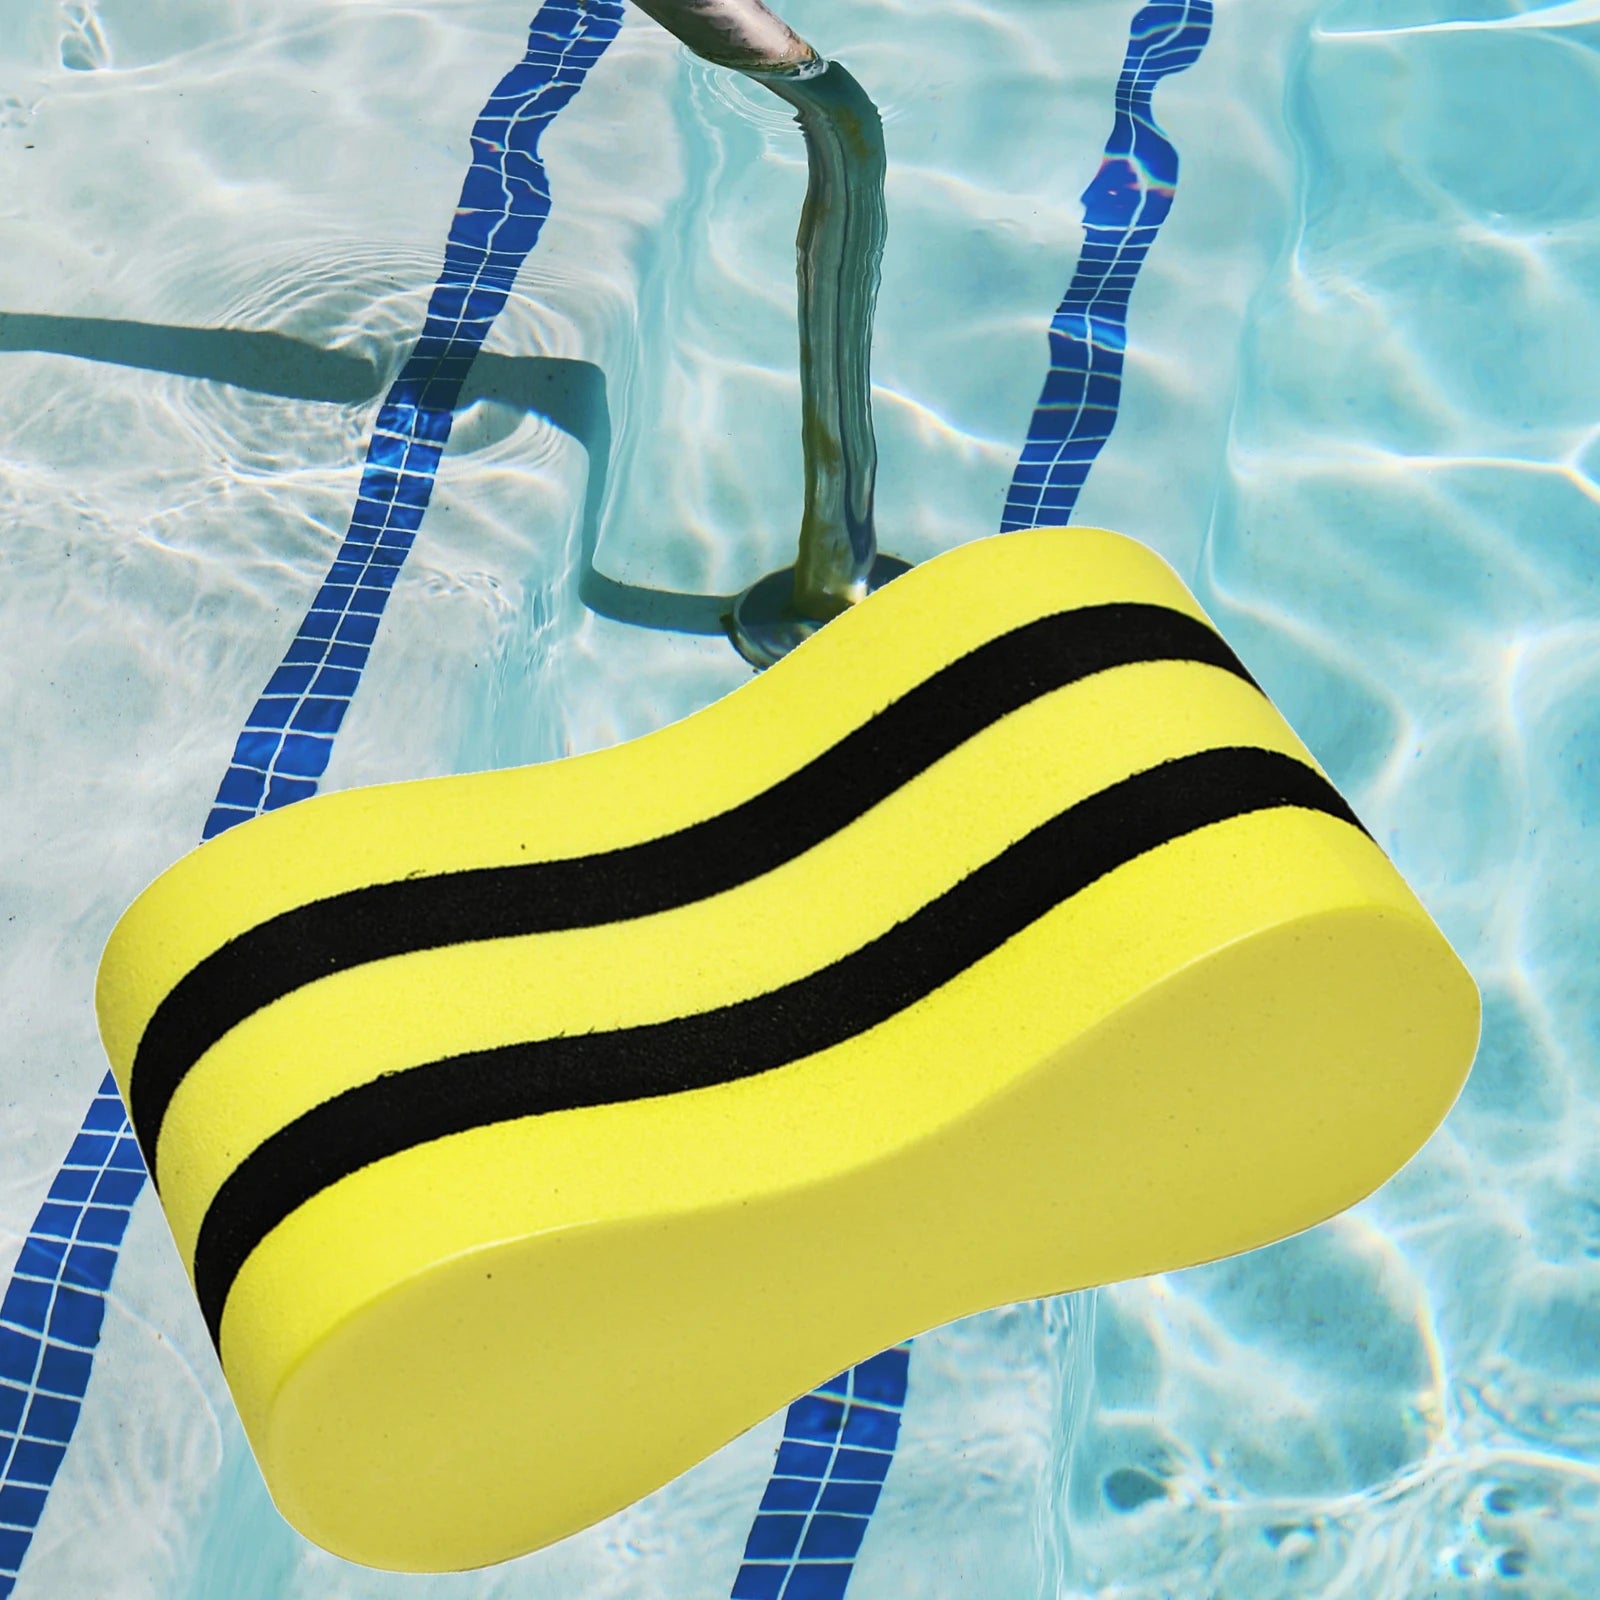 Swimming Trainer Aid with Legs and Hips Support - Pull Buoy Leg Floats